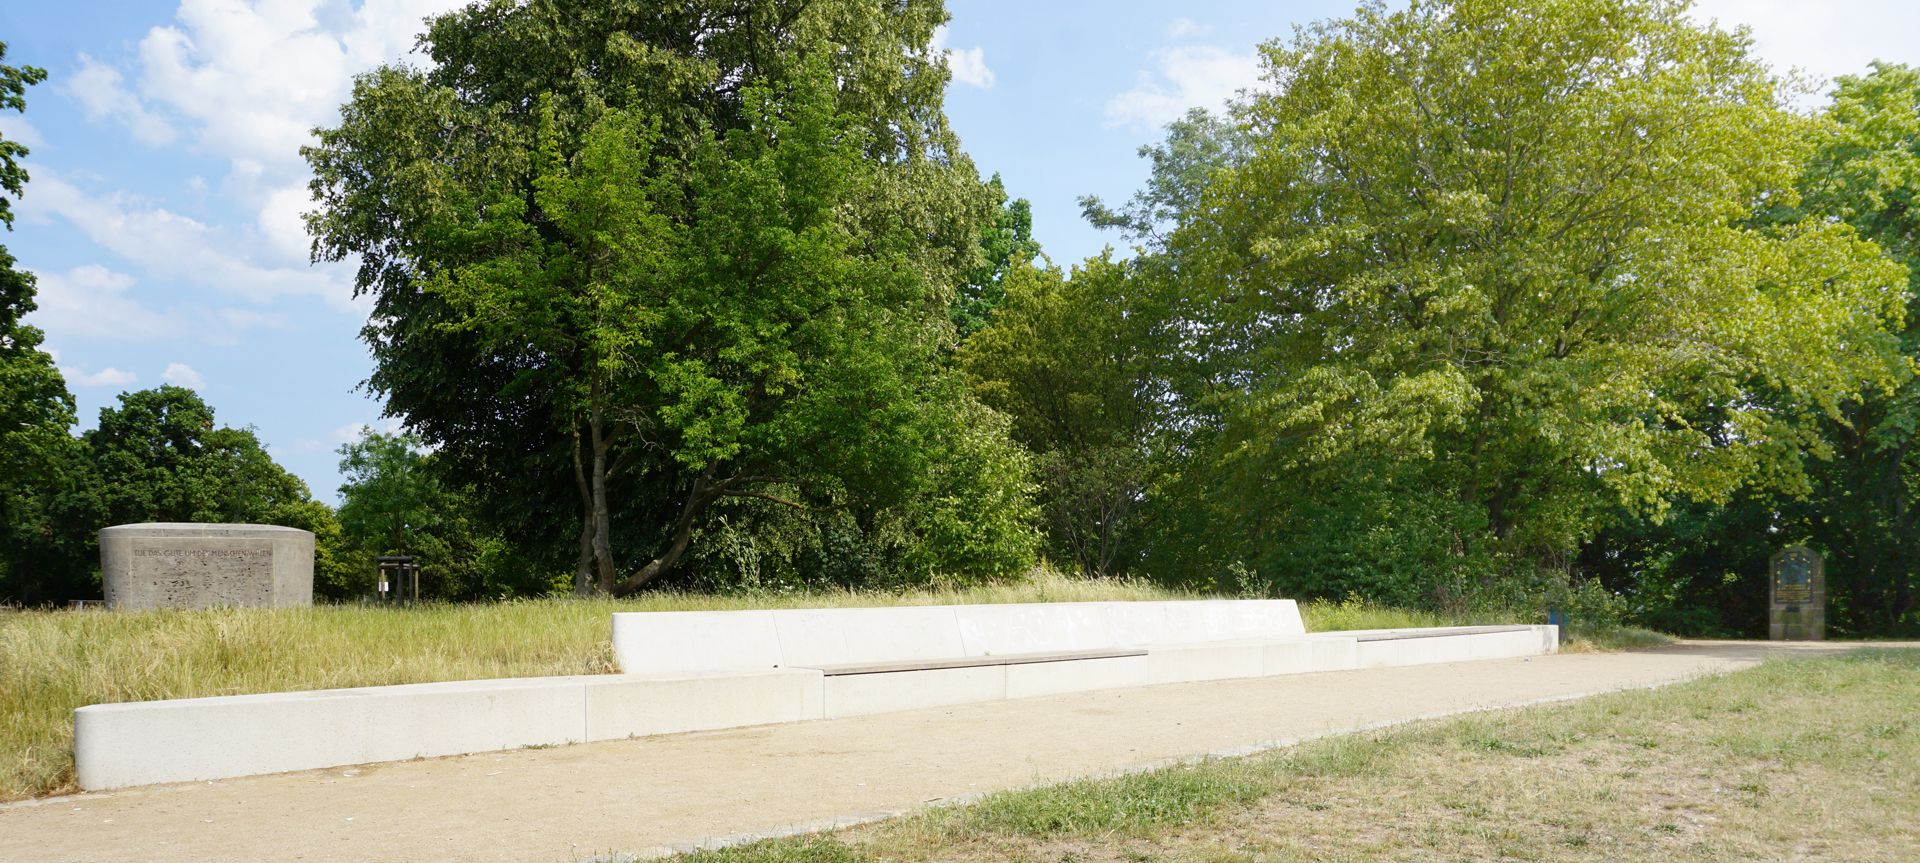 Ludwig Feuerbach Denkmal Panorama bench on the Rechenberg, on the left a monument from 1955, on the right a memorial plaque from 1906 (location since 1999)